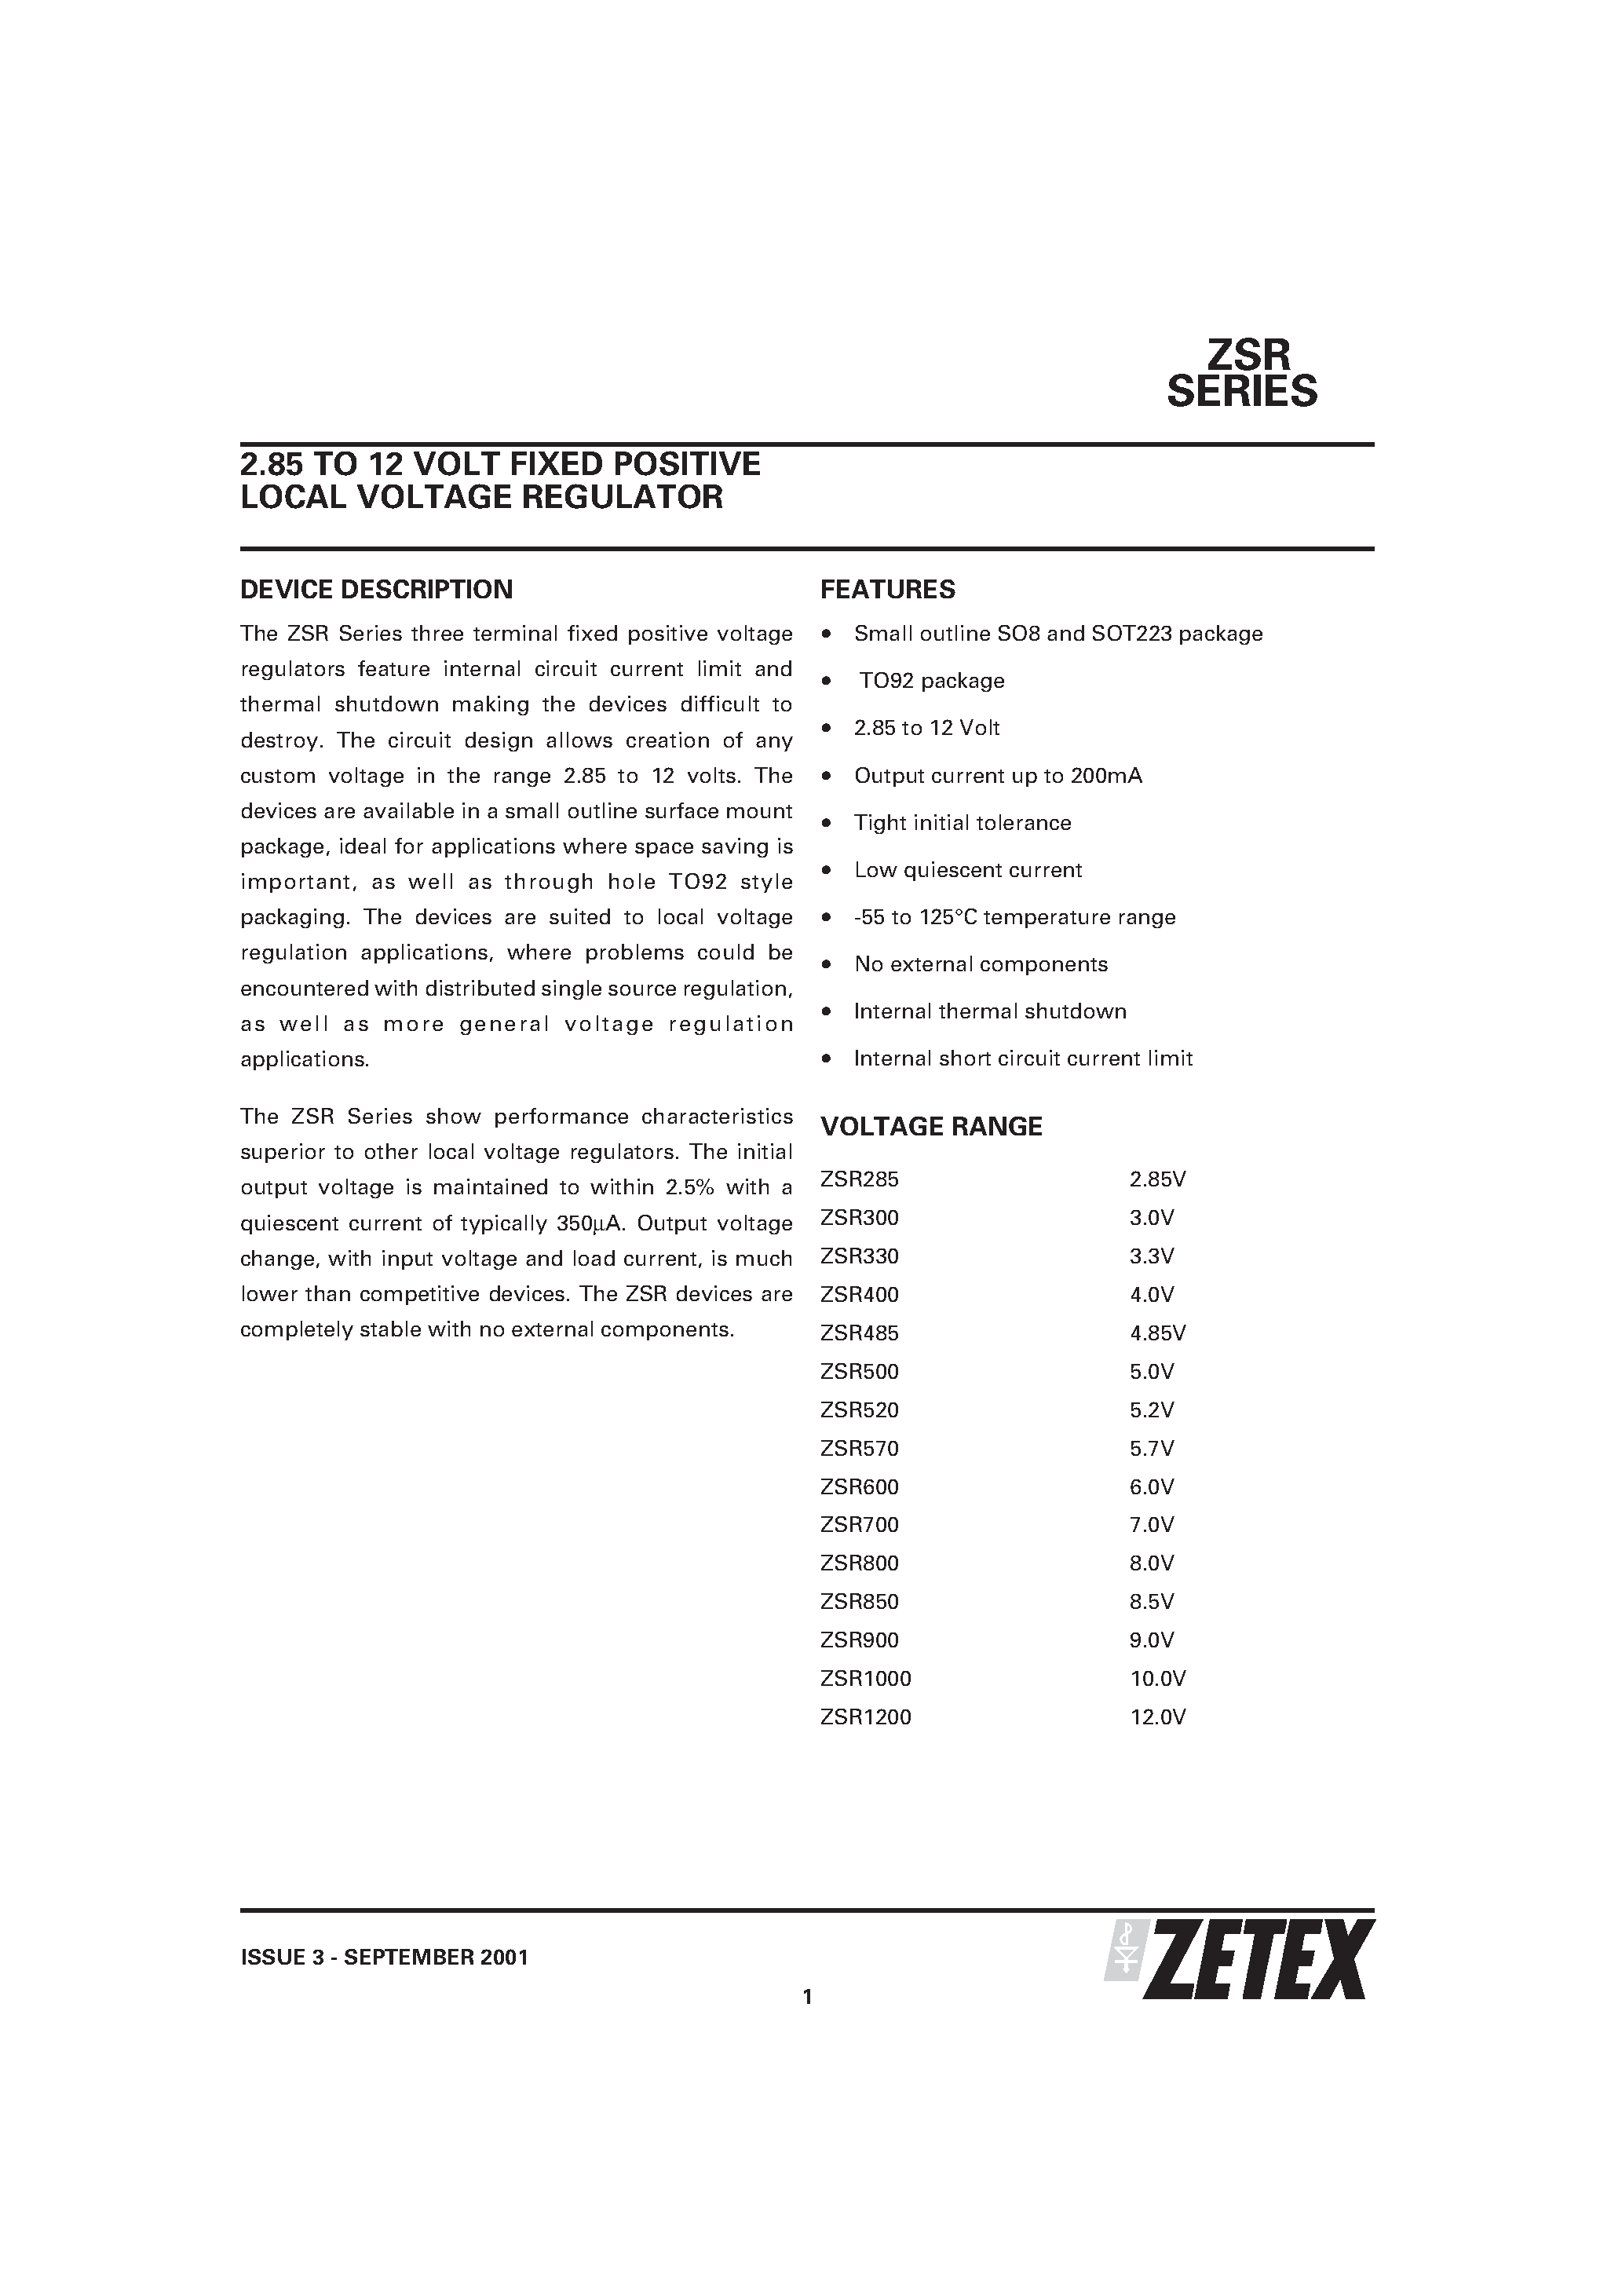 Datasheet ZSR330N8 - 2.85 TO 12 VOLT FIXED POSITIVE LOCAL VOLTAGE REGULATOR page 1